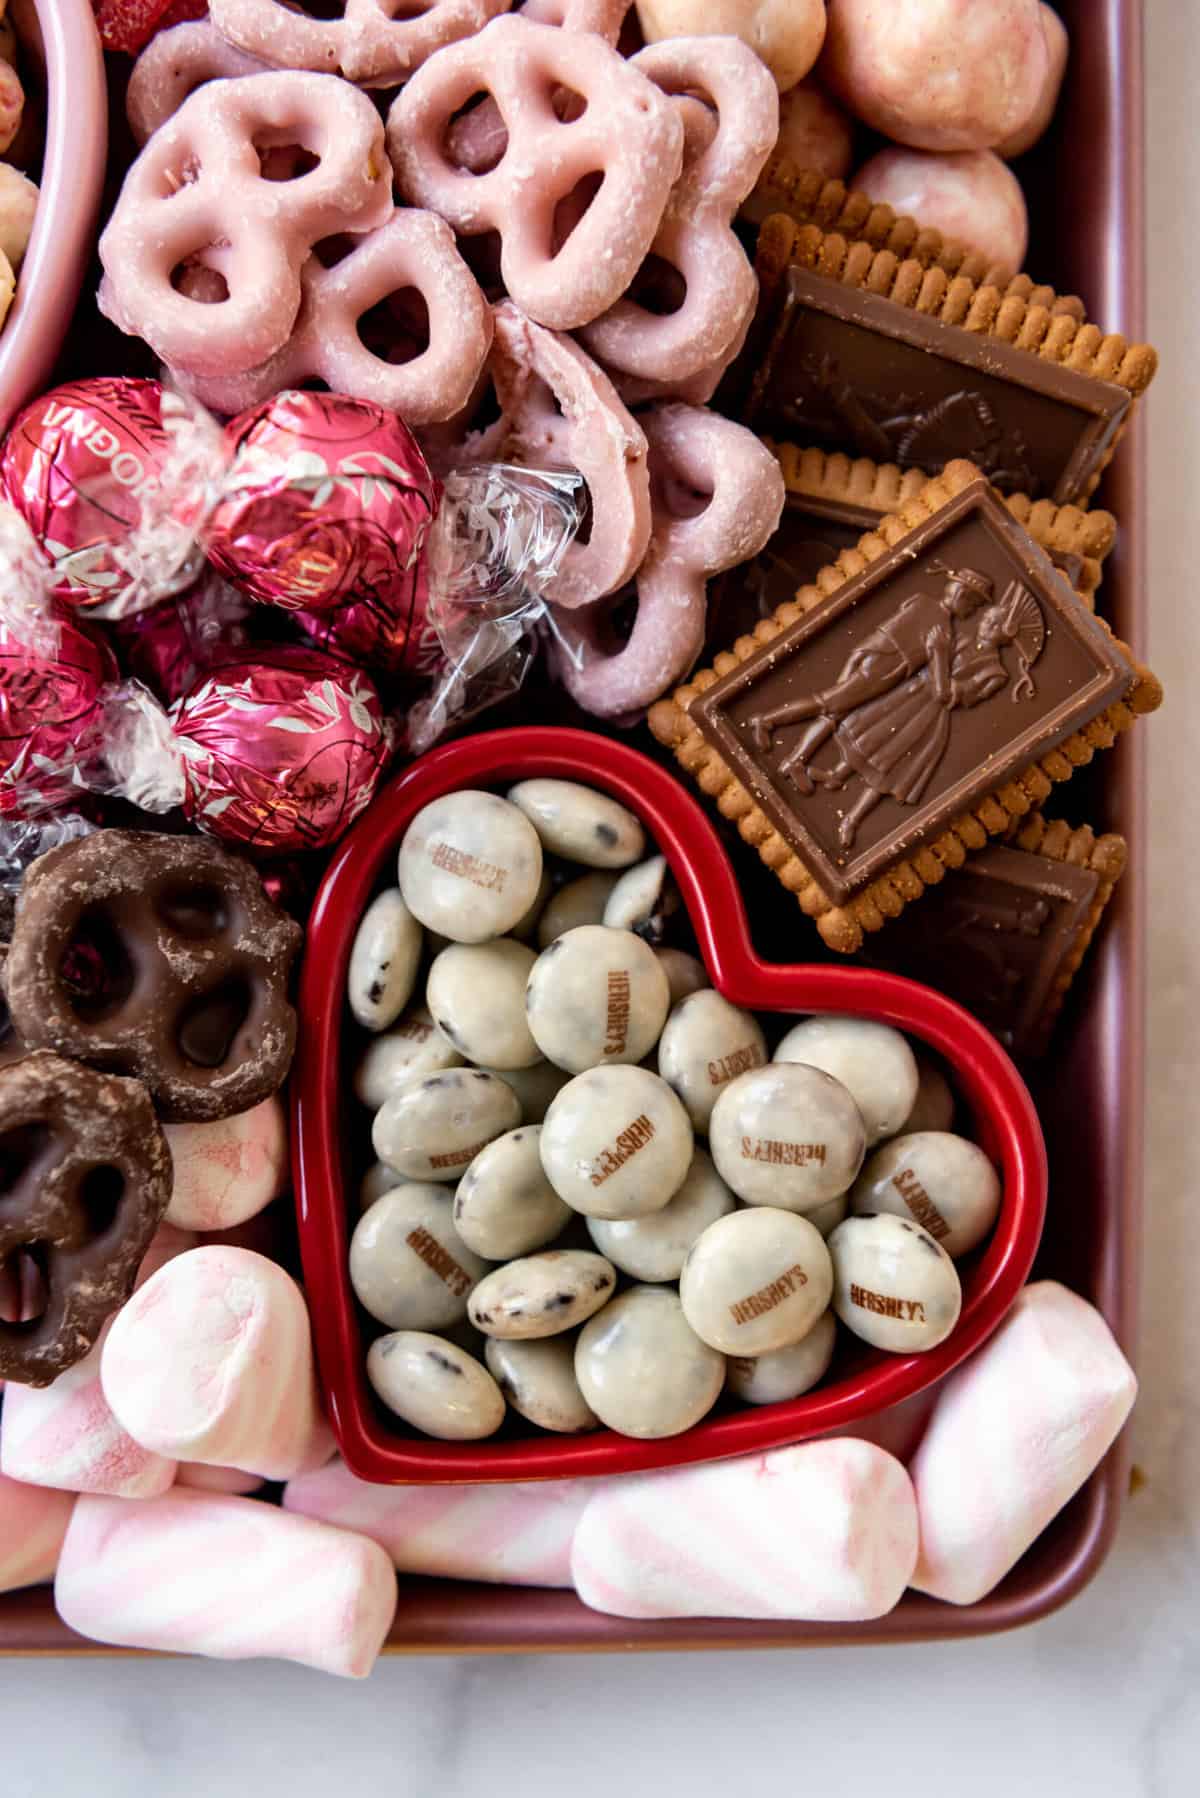 A red bowl of Hershey's cookies & cream drops surrounded by other marshmallows and chocolate candy, cookies, and pretzels.